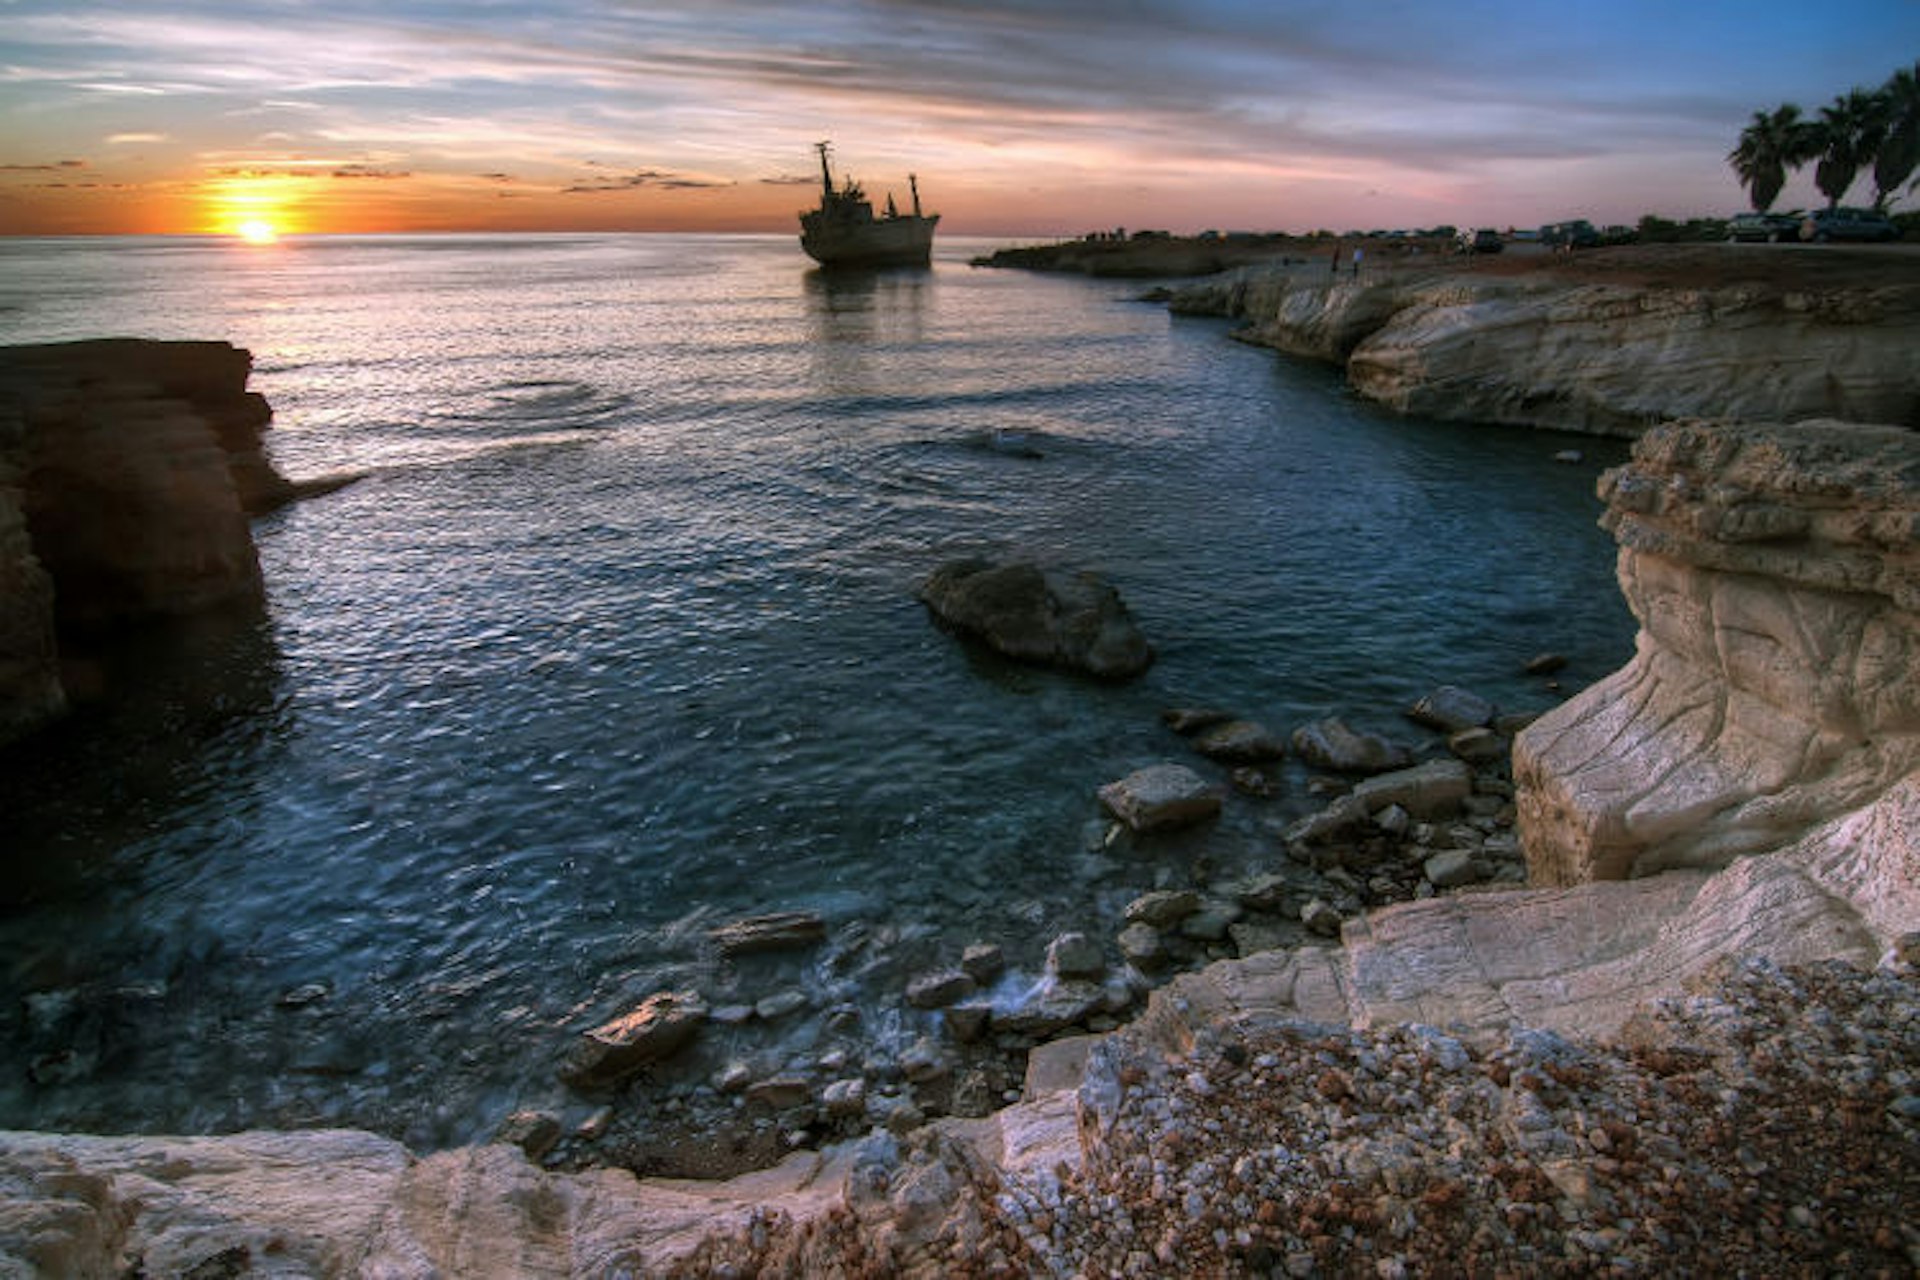 Wreck of Edro III, sea caves near Pafos. Image by Getty Images